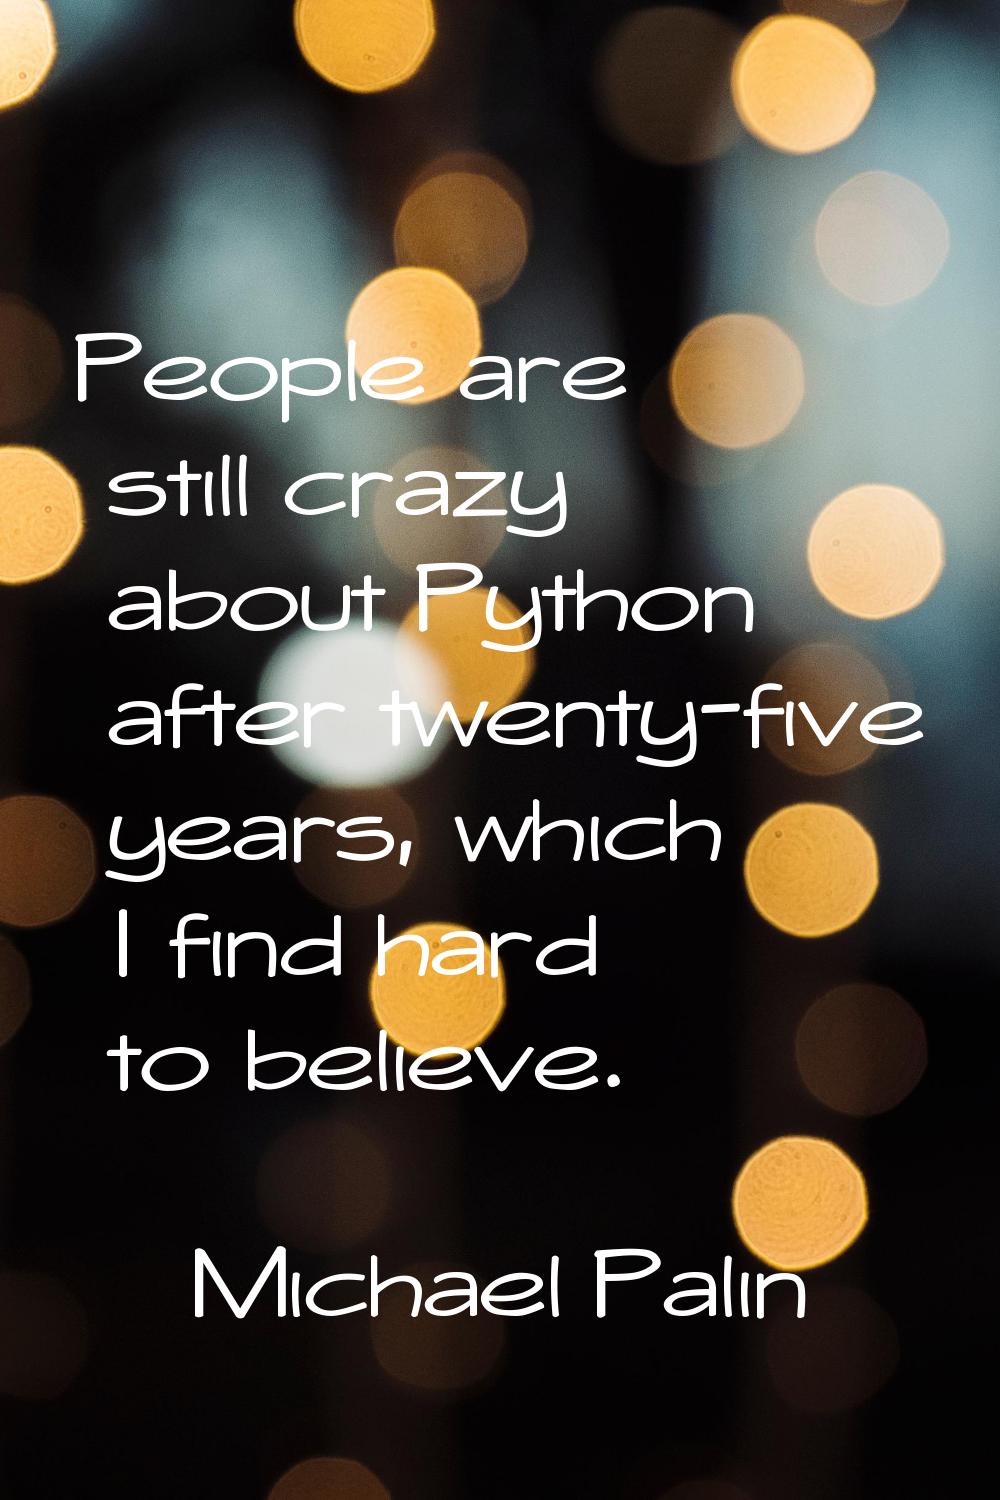 People are still crazy about Python after twenty-five years, which I find hard to believe.